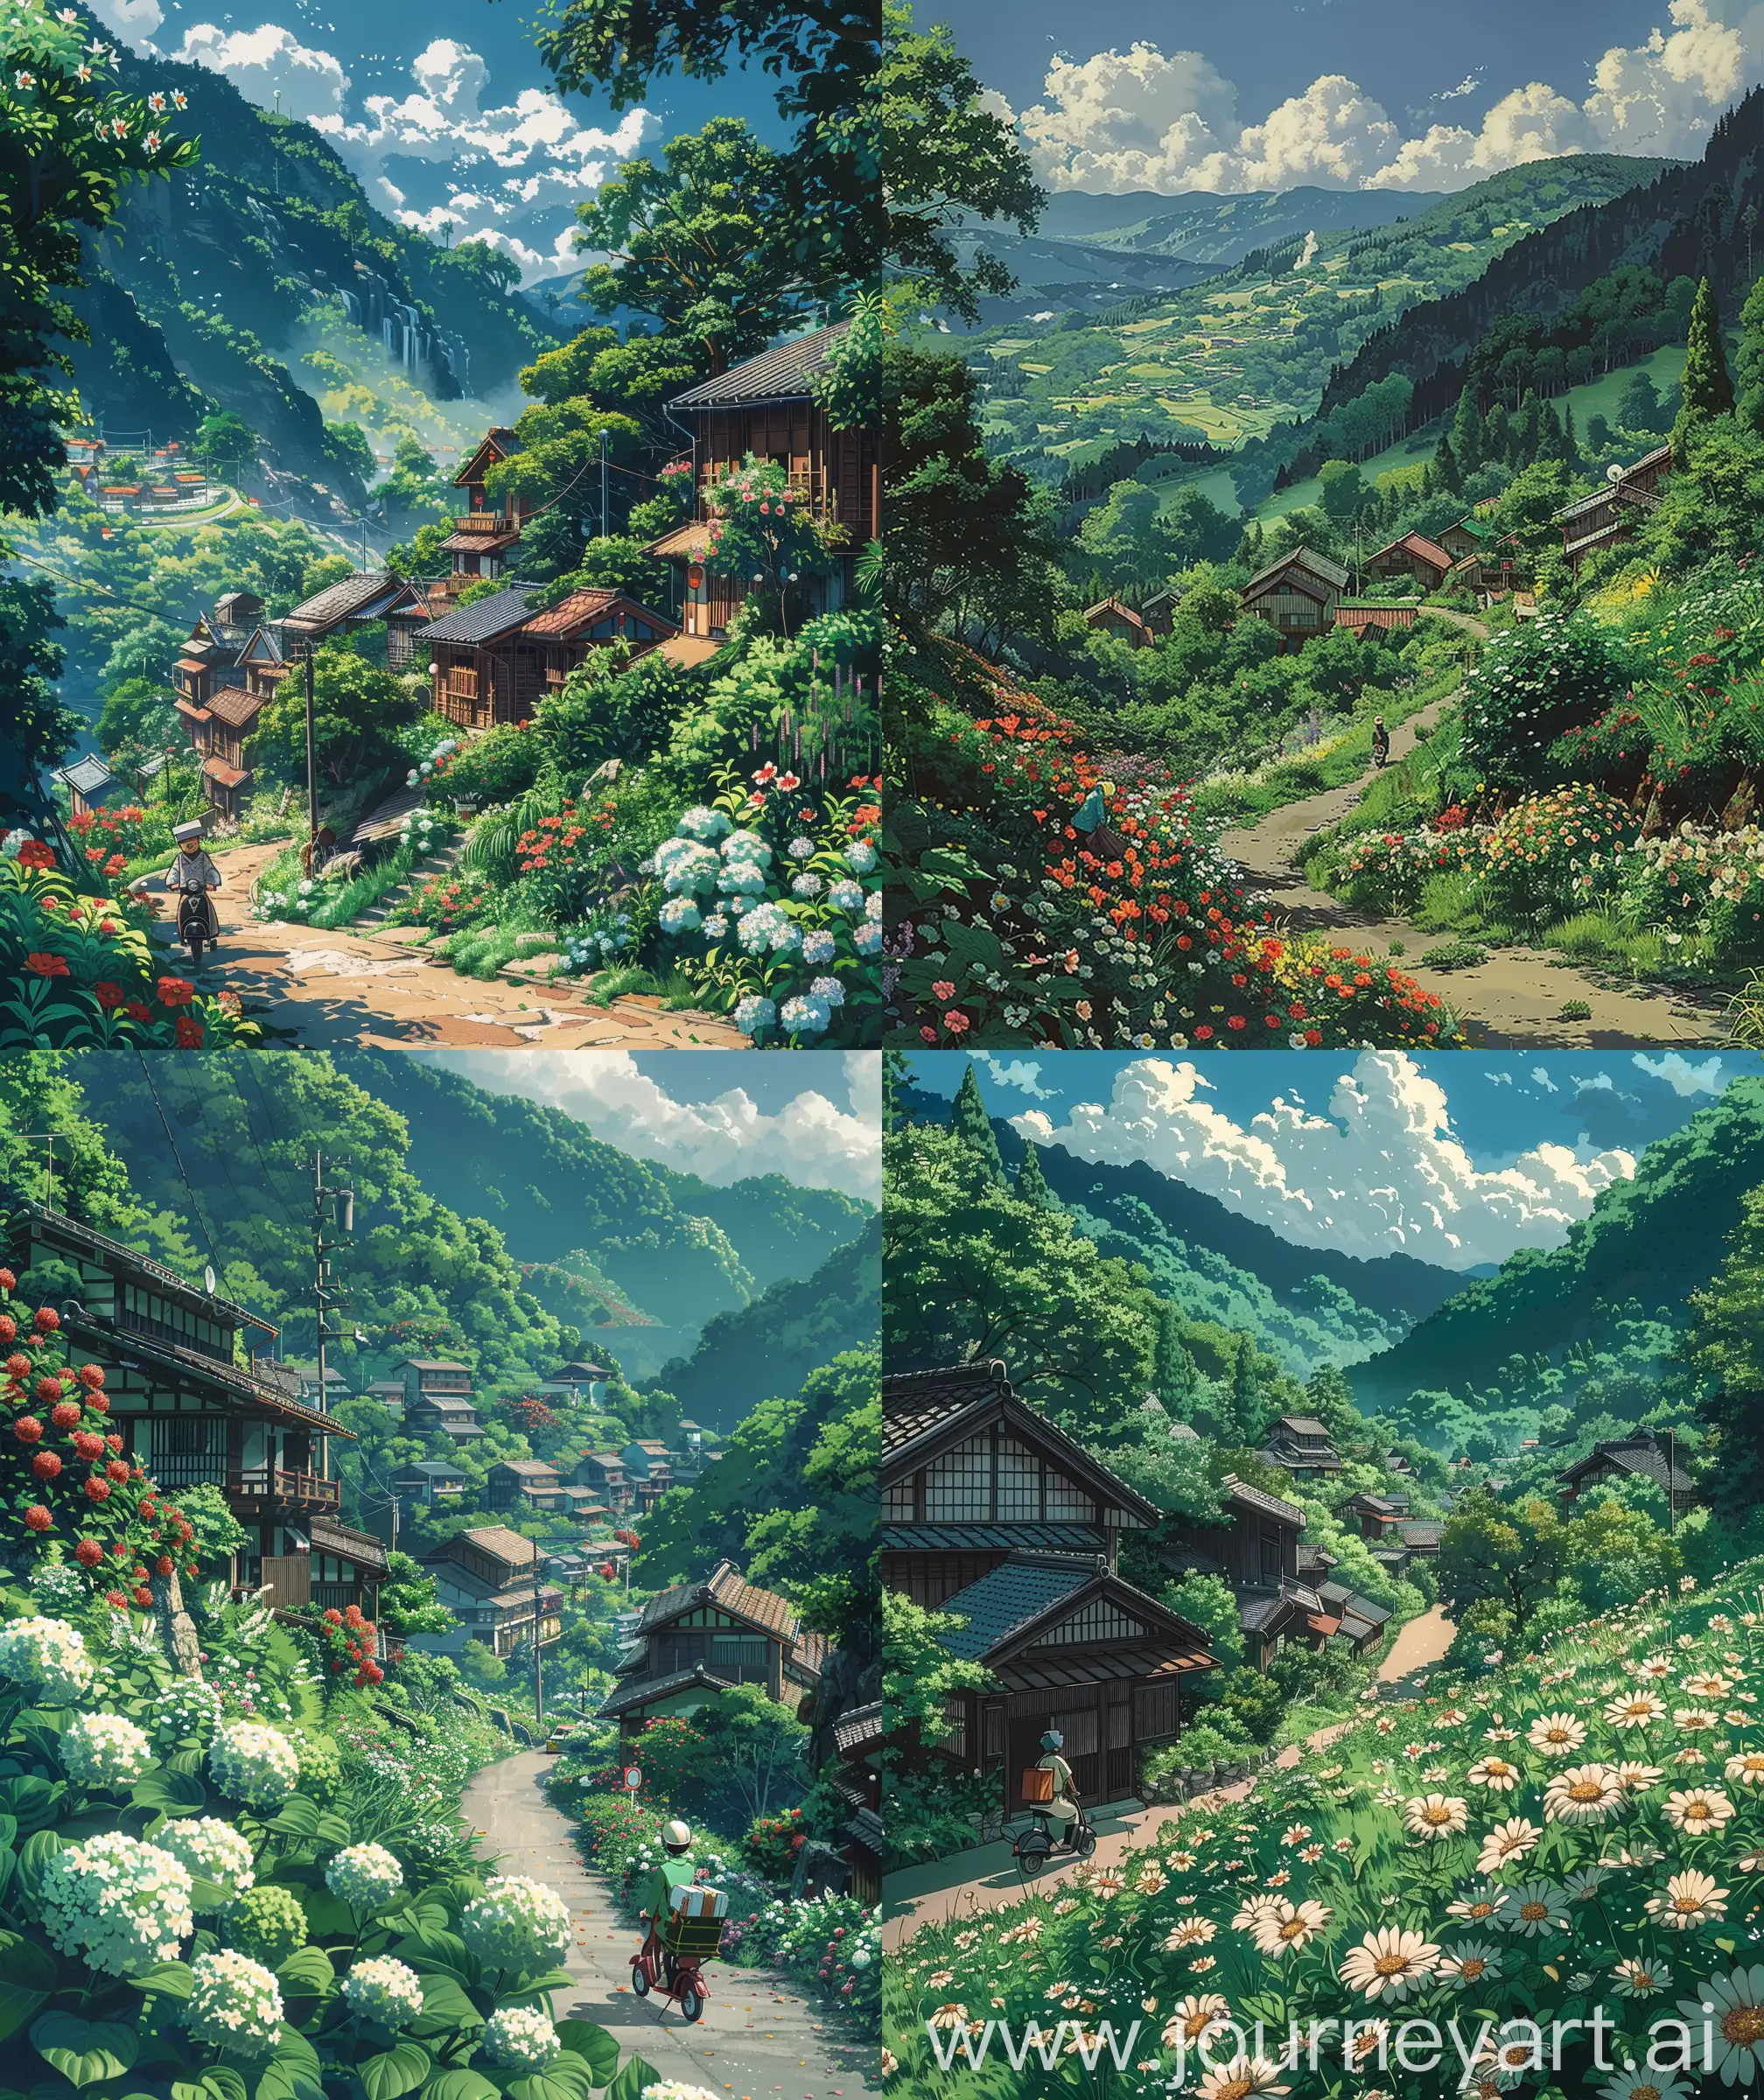 Anime scenary, illustration, day time, mokoto shinkai style, countryside, mail man on scooter , hillside village, beside road, many flowers, greenery,  ultra HD, illustration, High quality, no blurry image, no hyperrealistic --ar 27:32 --s 400